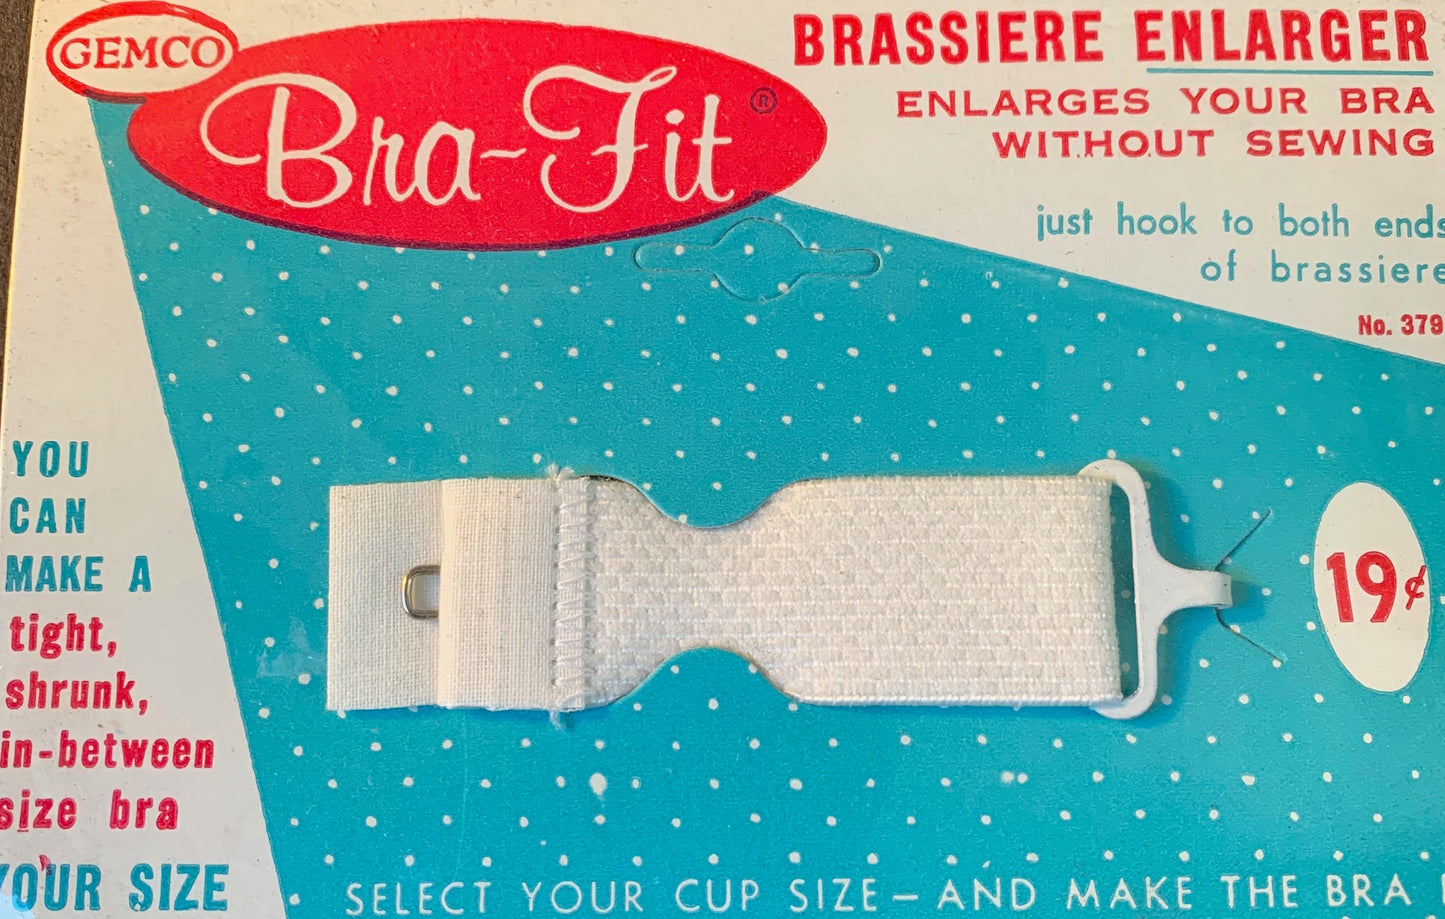 1940s BRASSIERE ENLARGER "ENLARGES YOUR BRA WITHOUT SEWING"